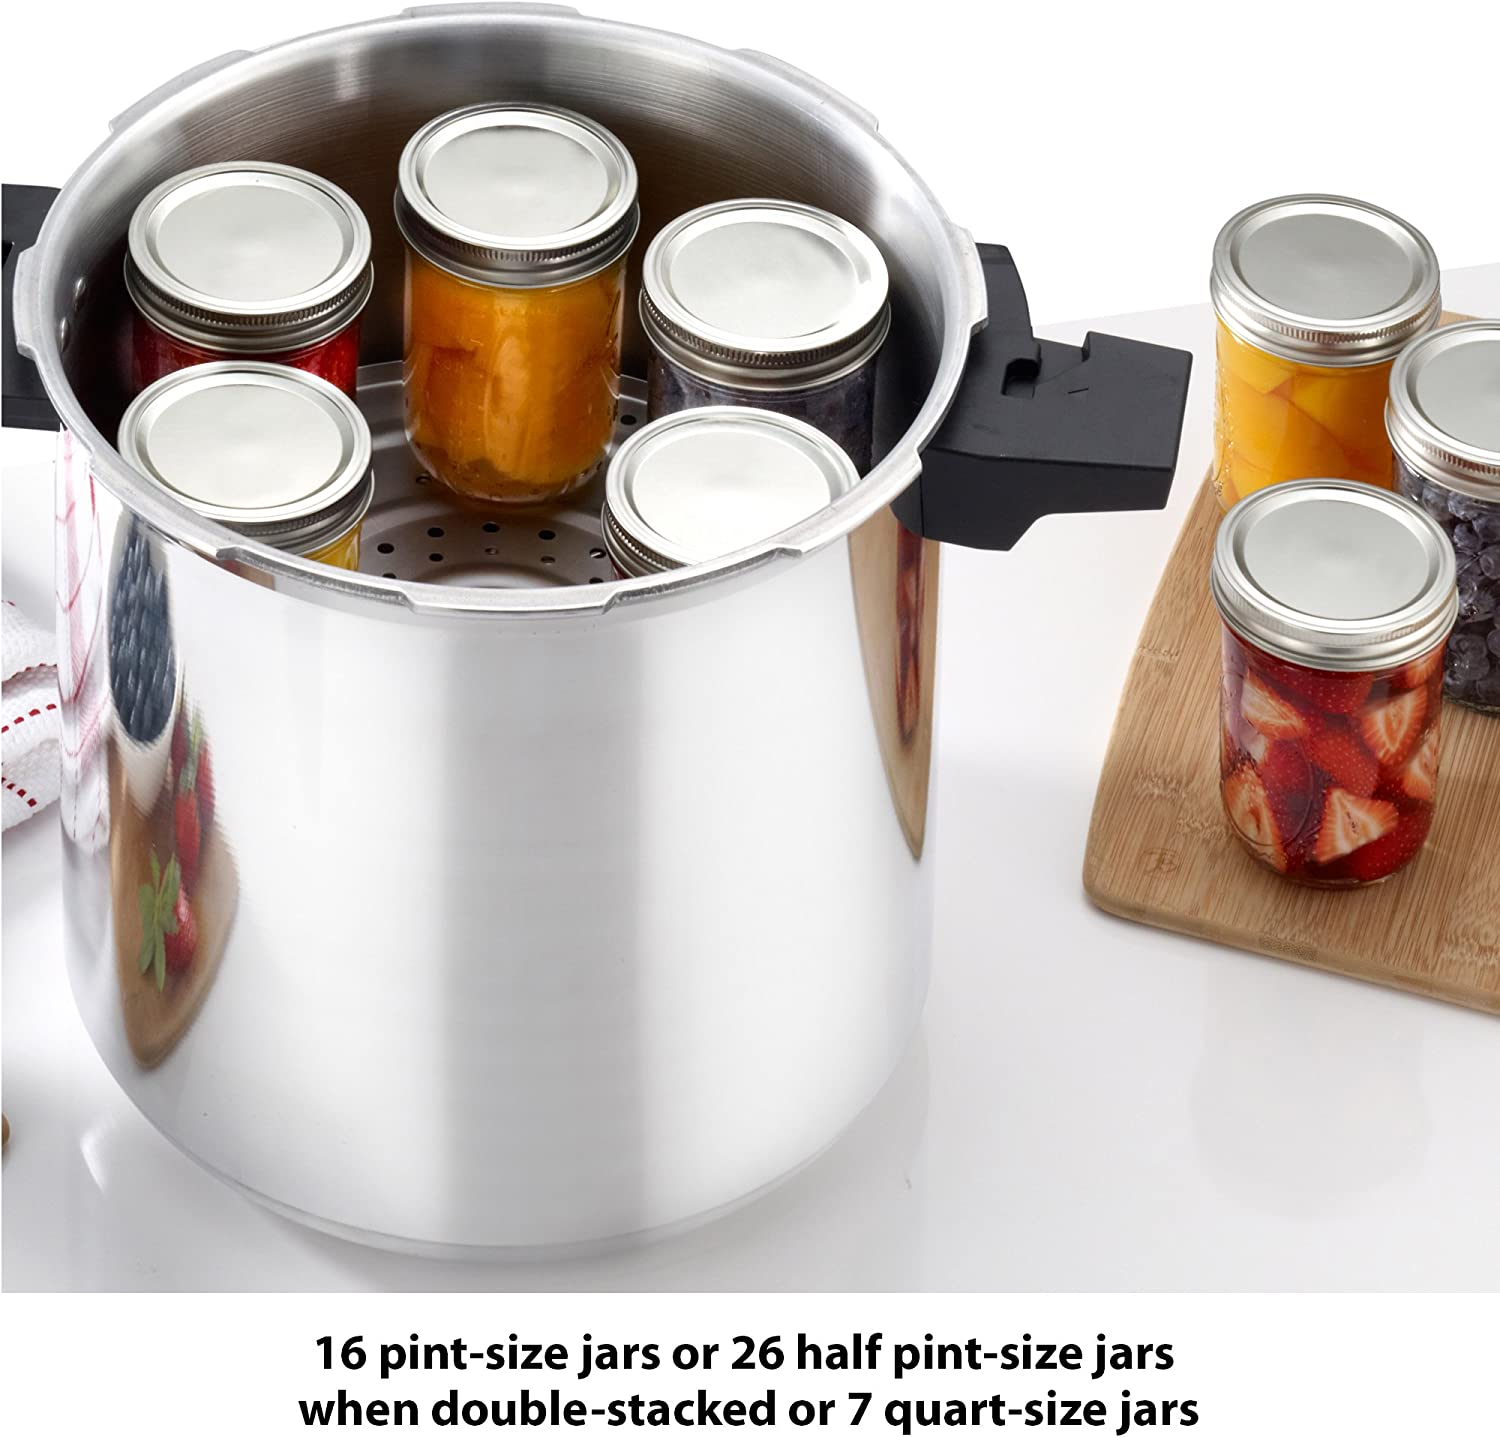 https://bigbigmart.com/wp-content/uploads/2023/07/T-fal-Pressure-Cooker-22-Quart-Pressure-Canner-with-Pressure-Control-3-PSI-Settings-Cookware-Pots-and-Pans-Silver1.jpg